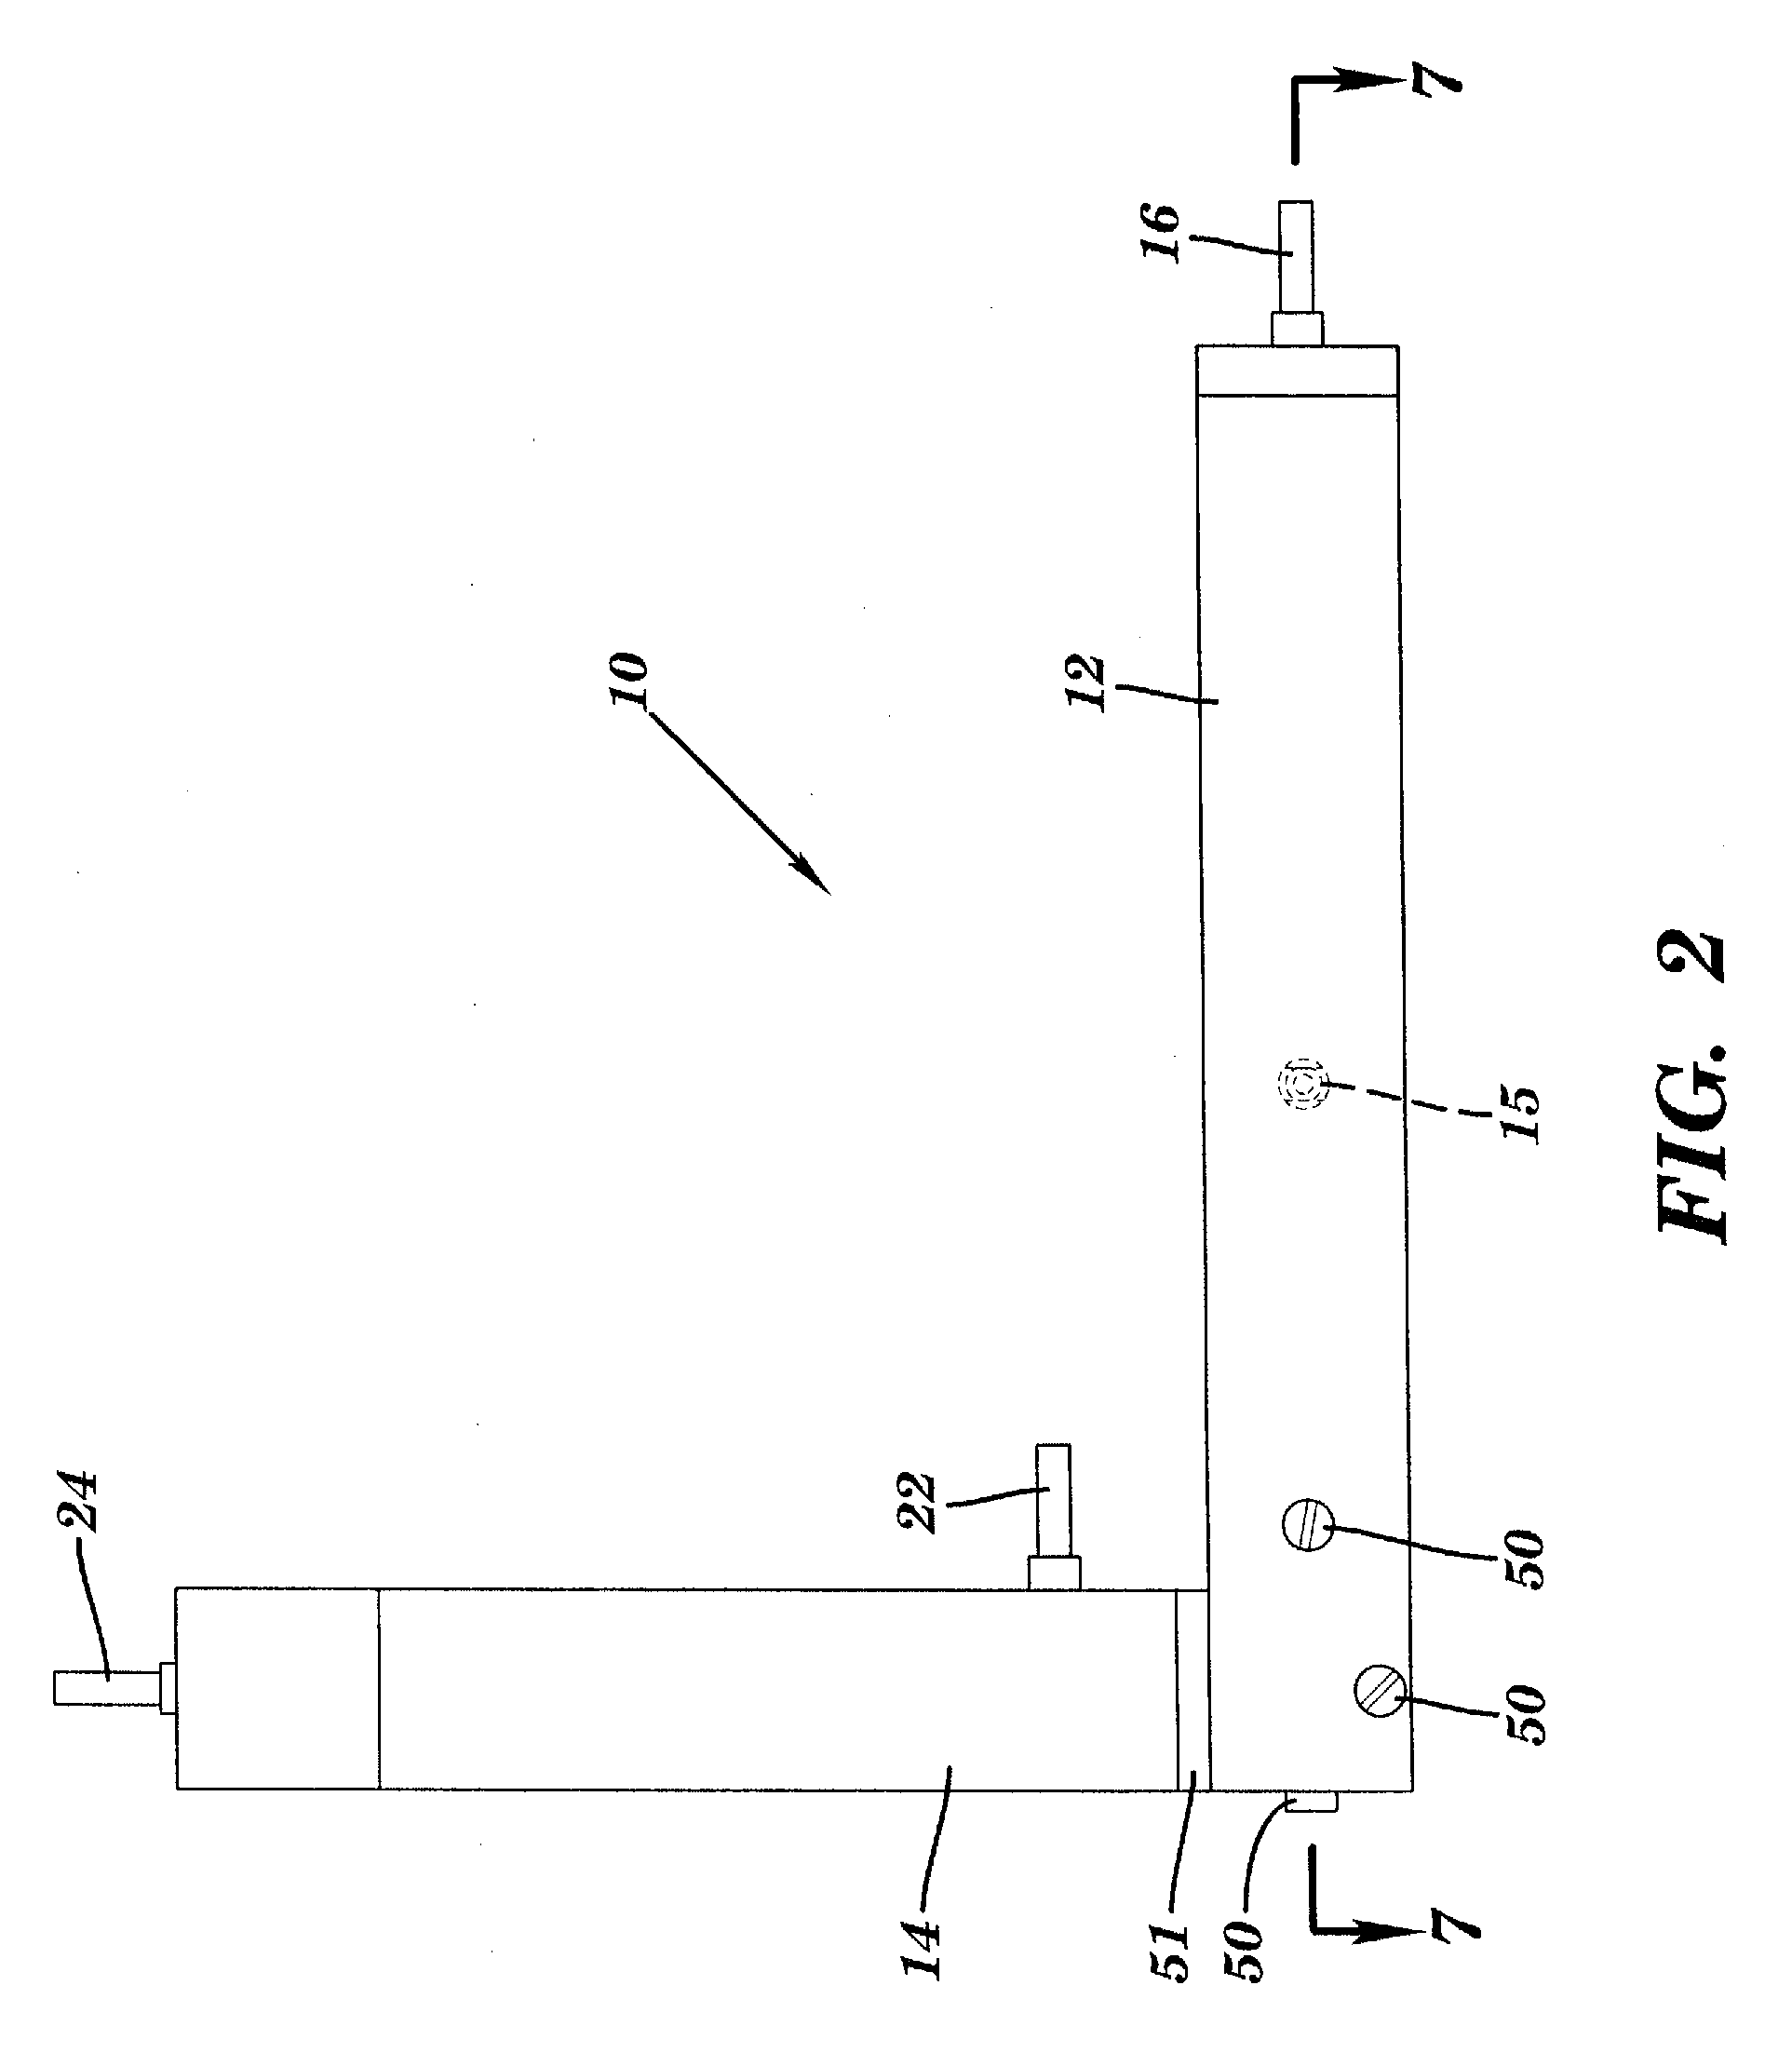 Devices, methods, and systems for detecting particles in aerosol gas streams